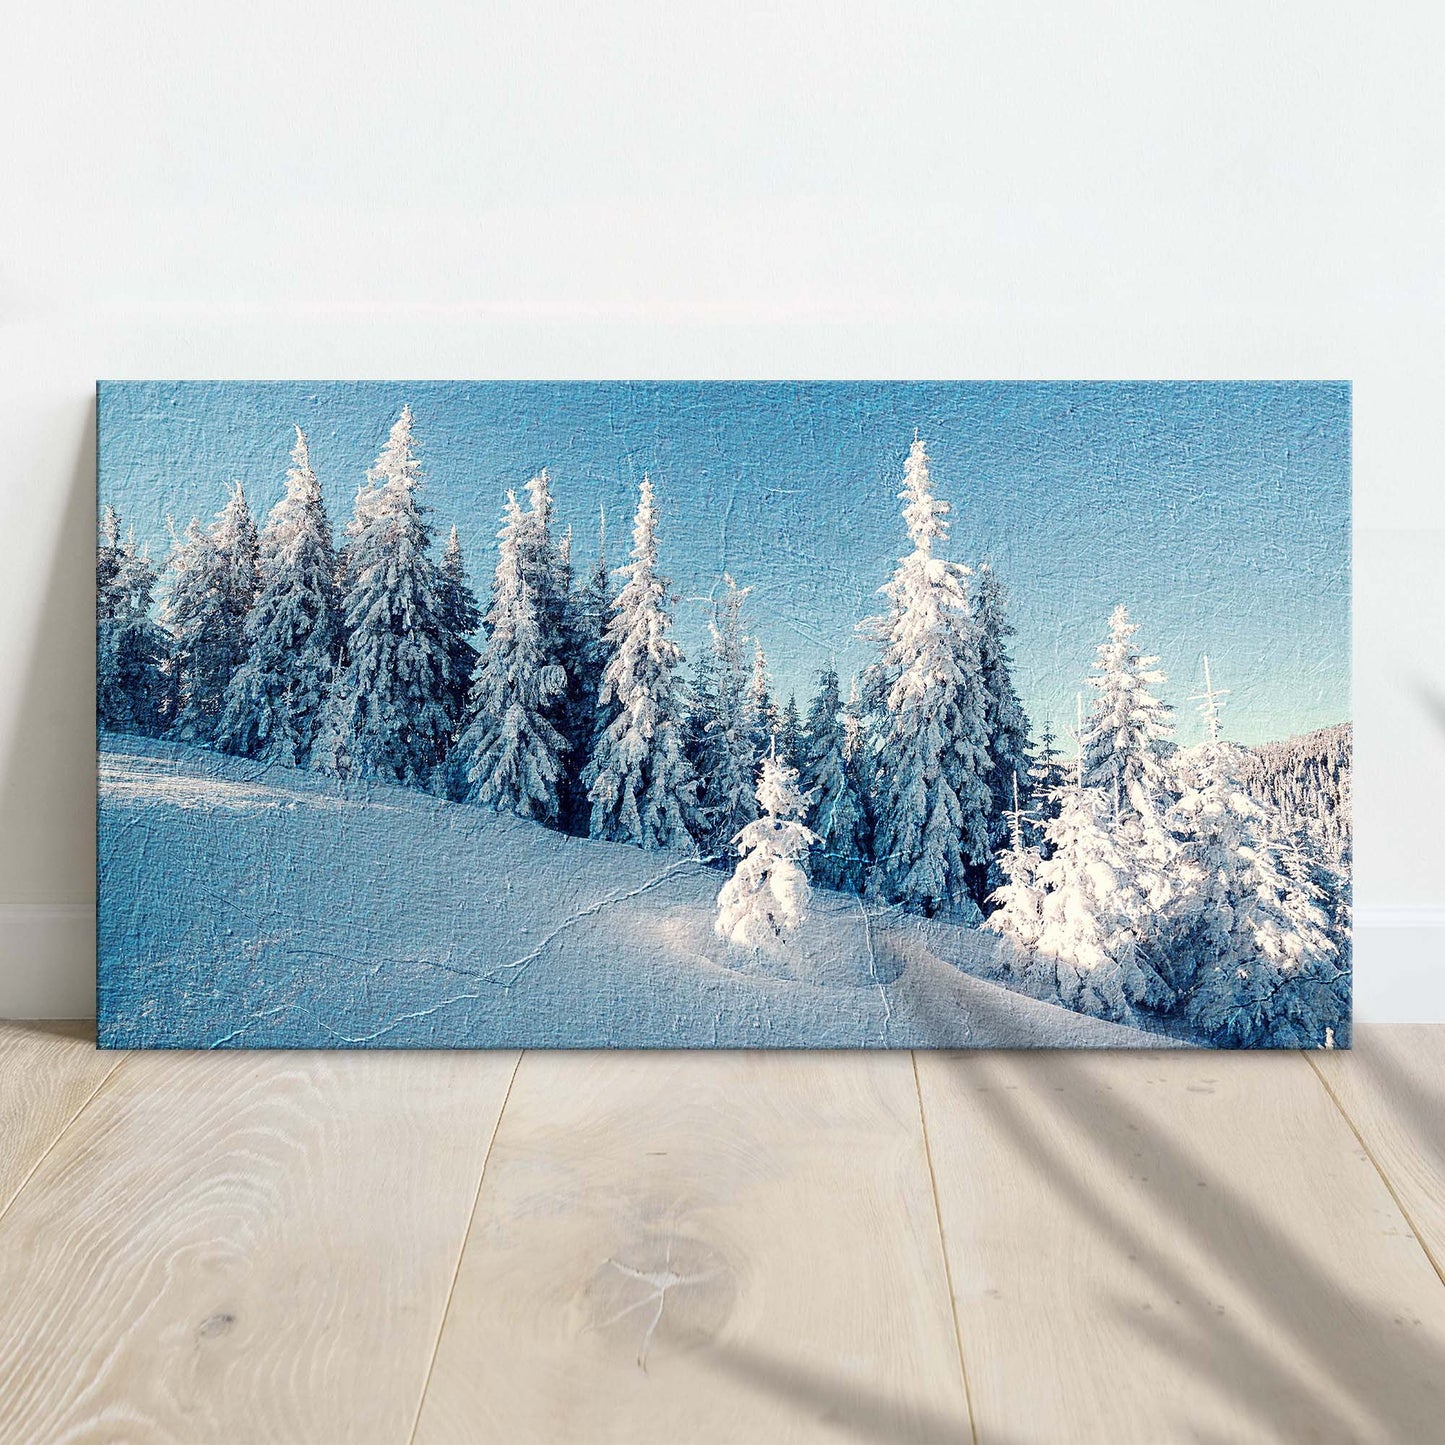 Snow Covered Pine Trees Canvas Wall Art - Image by Tailored Canvases